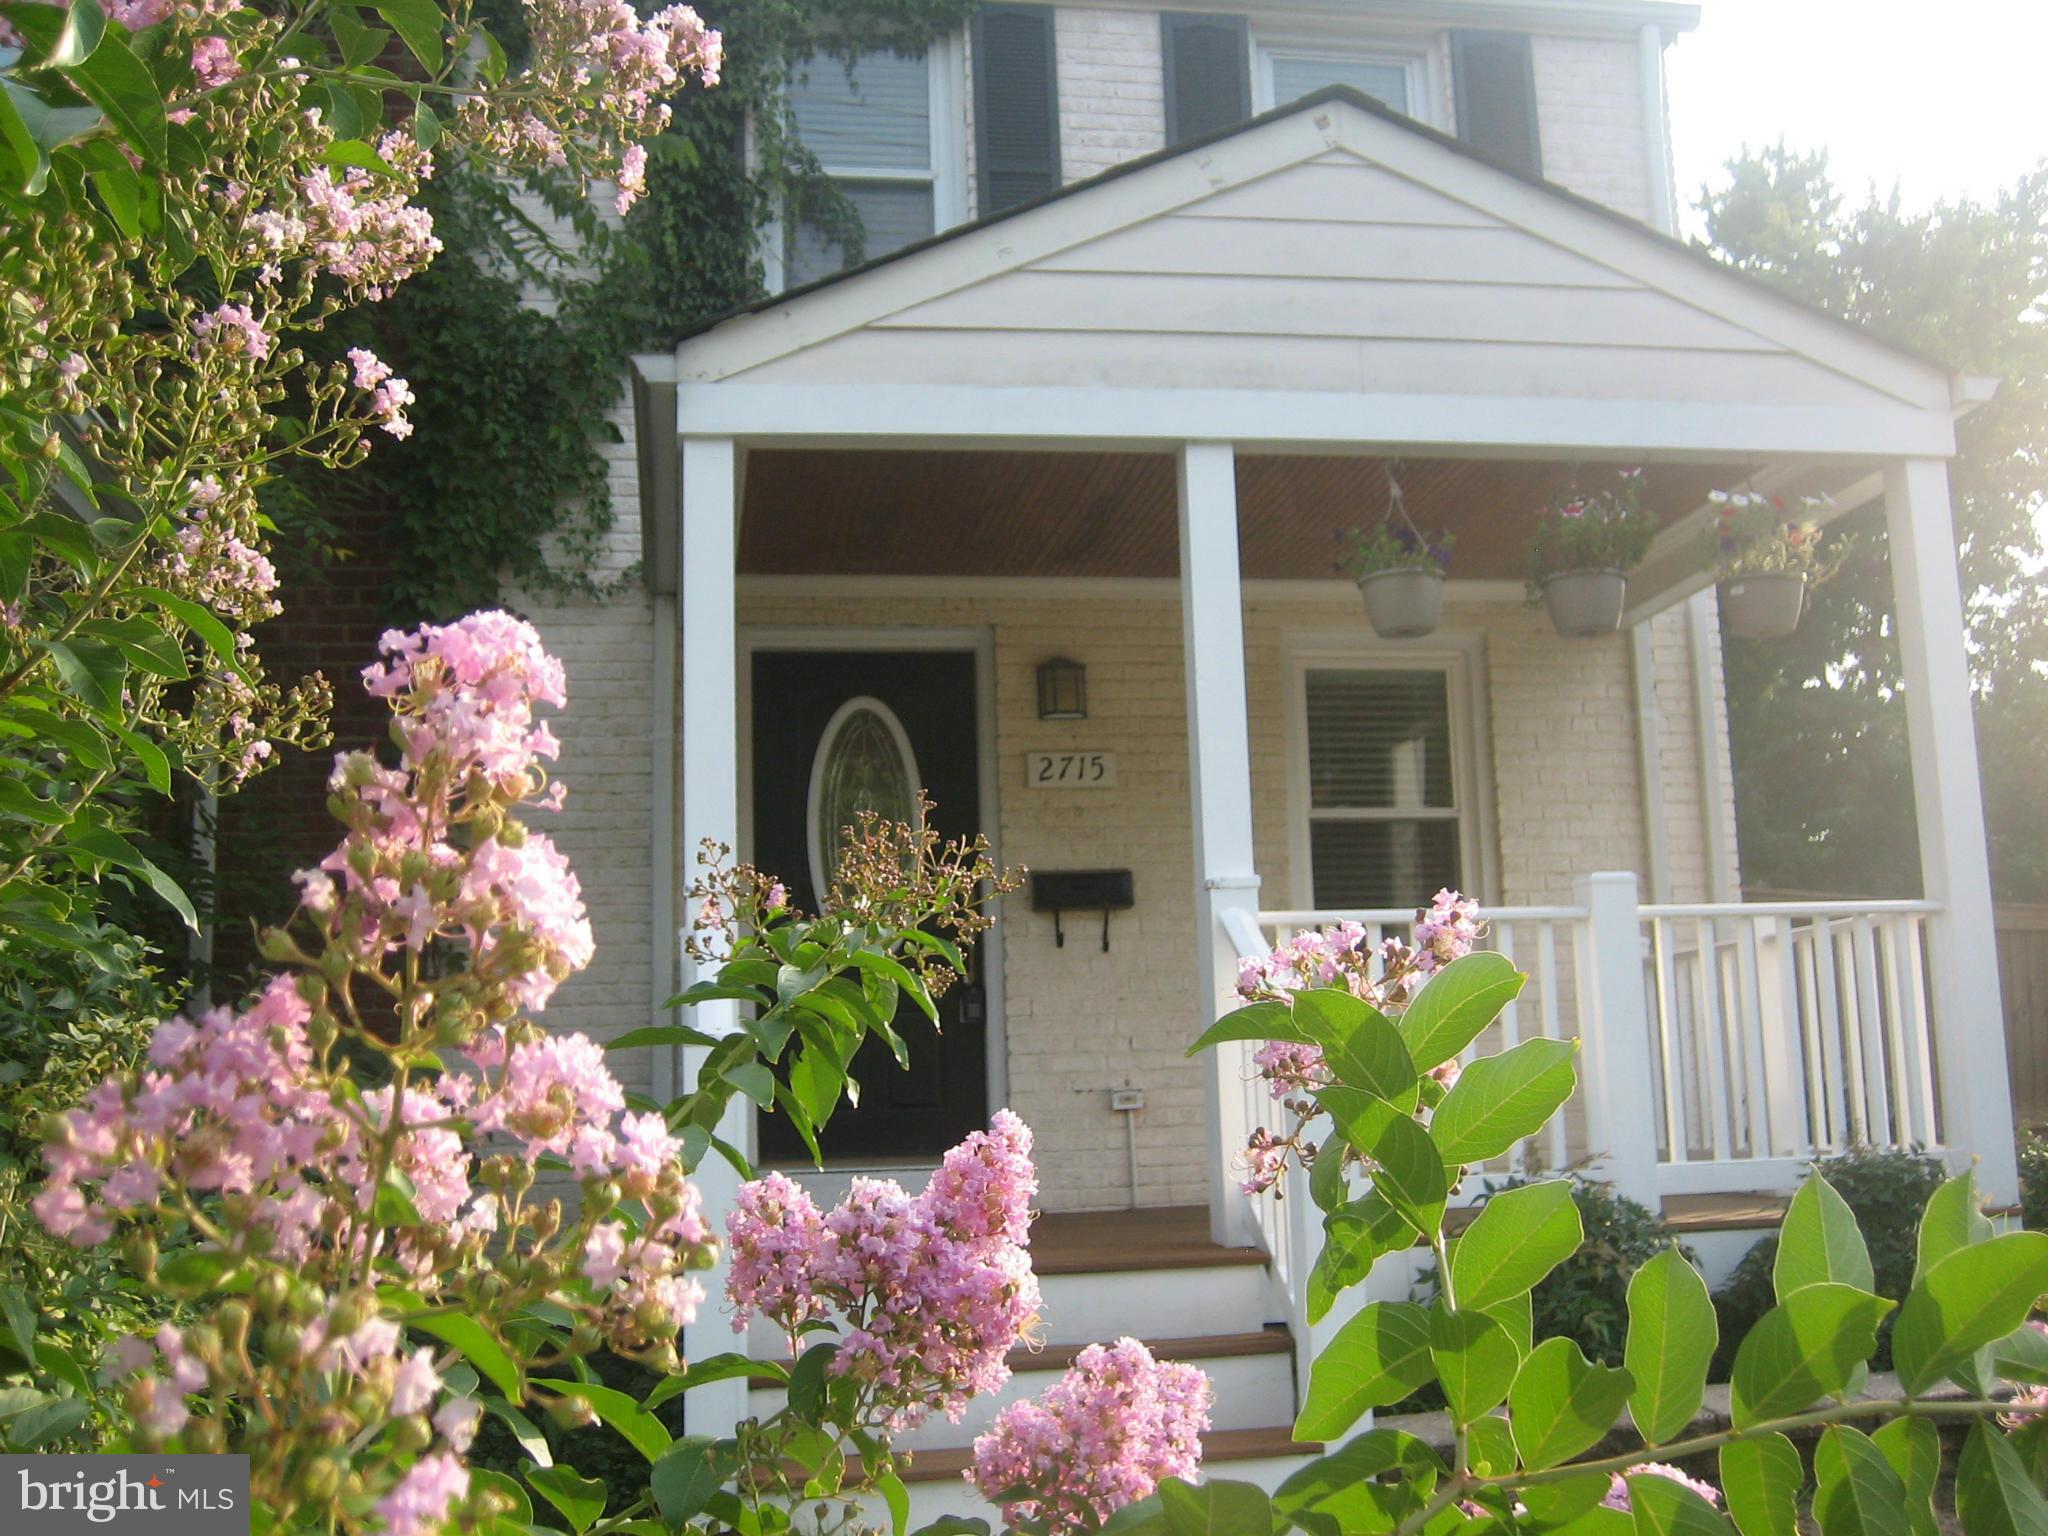 a front view of a house with a flower garden